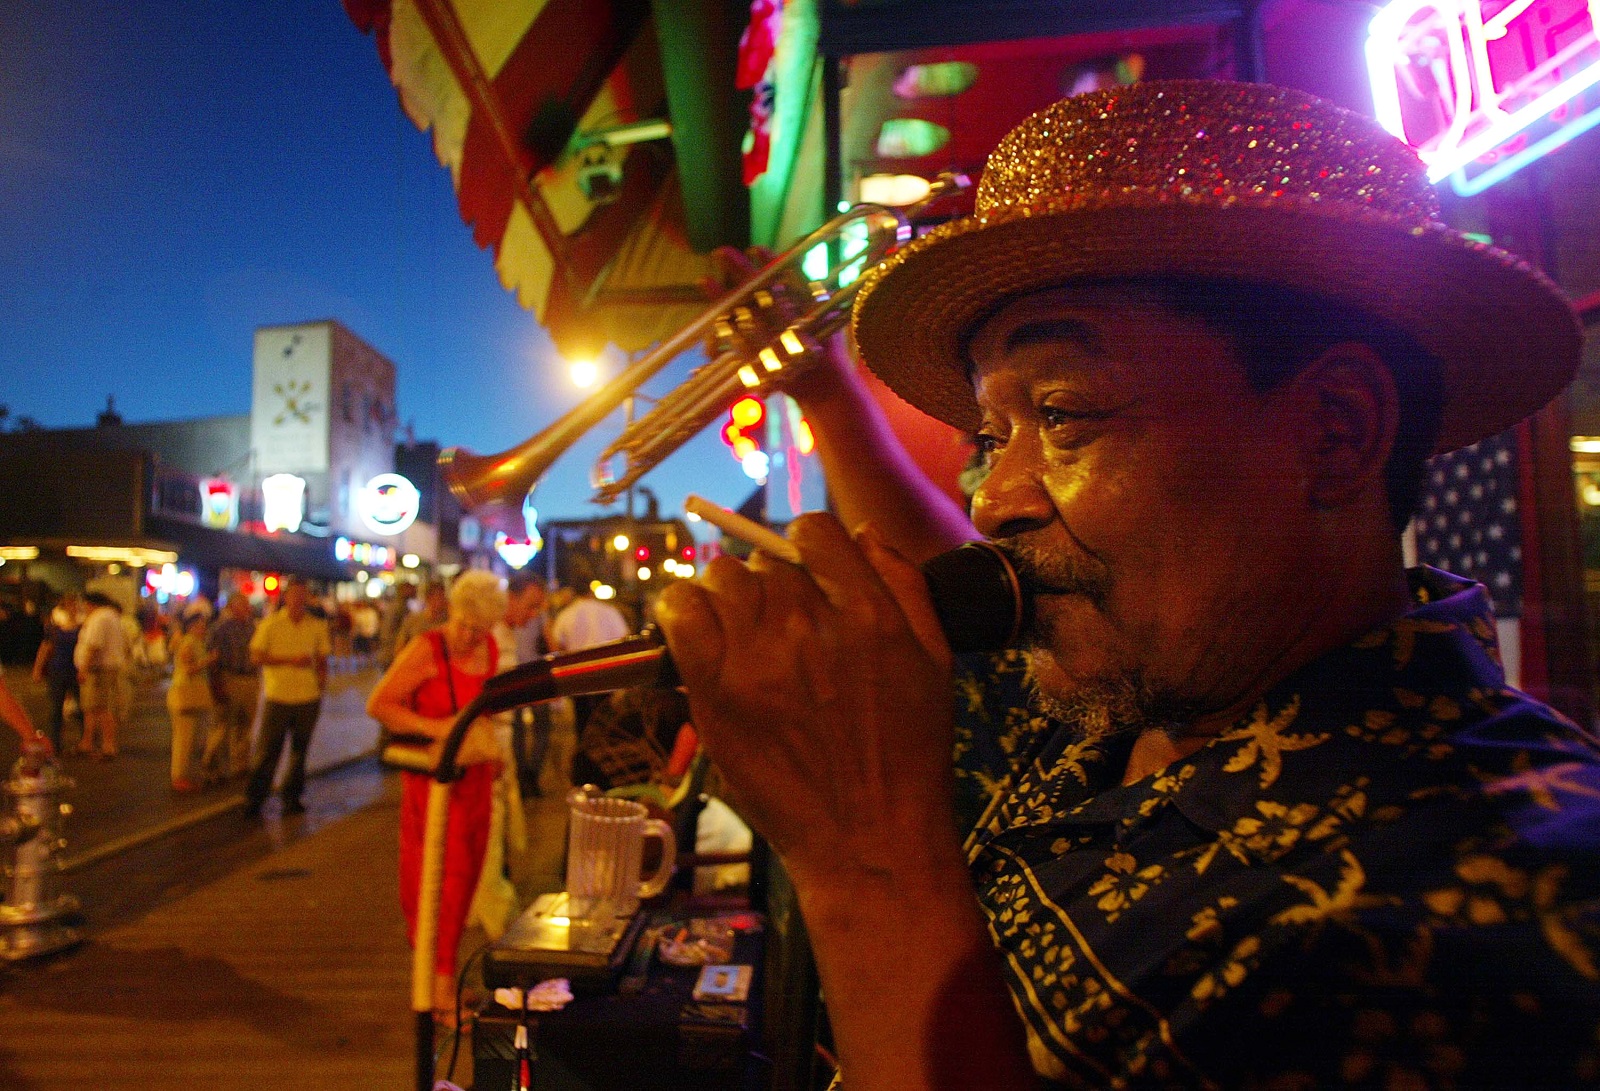 MEMPHIS - AUGUST 17:  A street performer sings on Beale Street during Elvis Week August 17, 2002 in Memphis, Tennessee. Up to 75,000 fans were expected to attend Memphis' Elvis Week which this year marks the 25th anniversary of Presley's August 16, 1977 death.  (Photo by Mario Tama/Gettty Images)